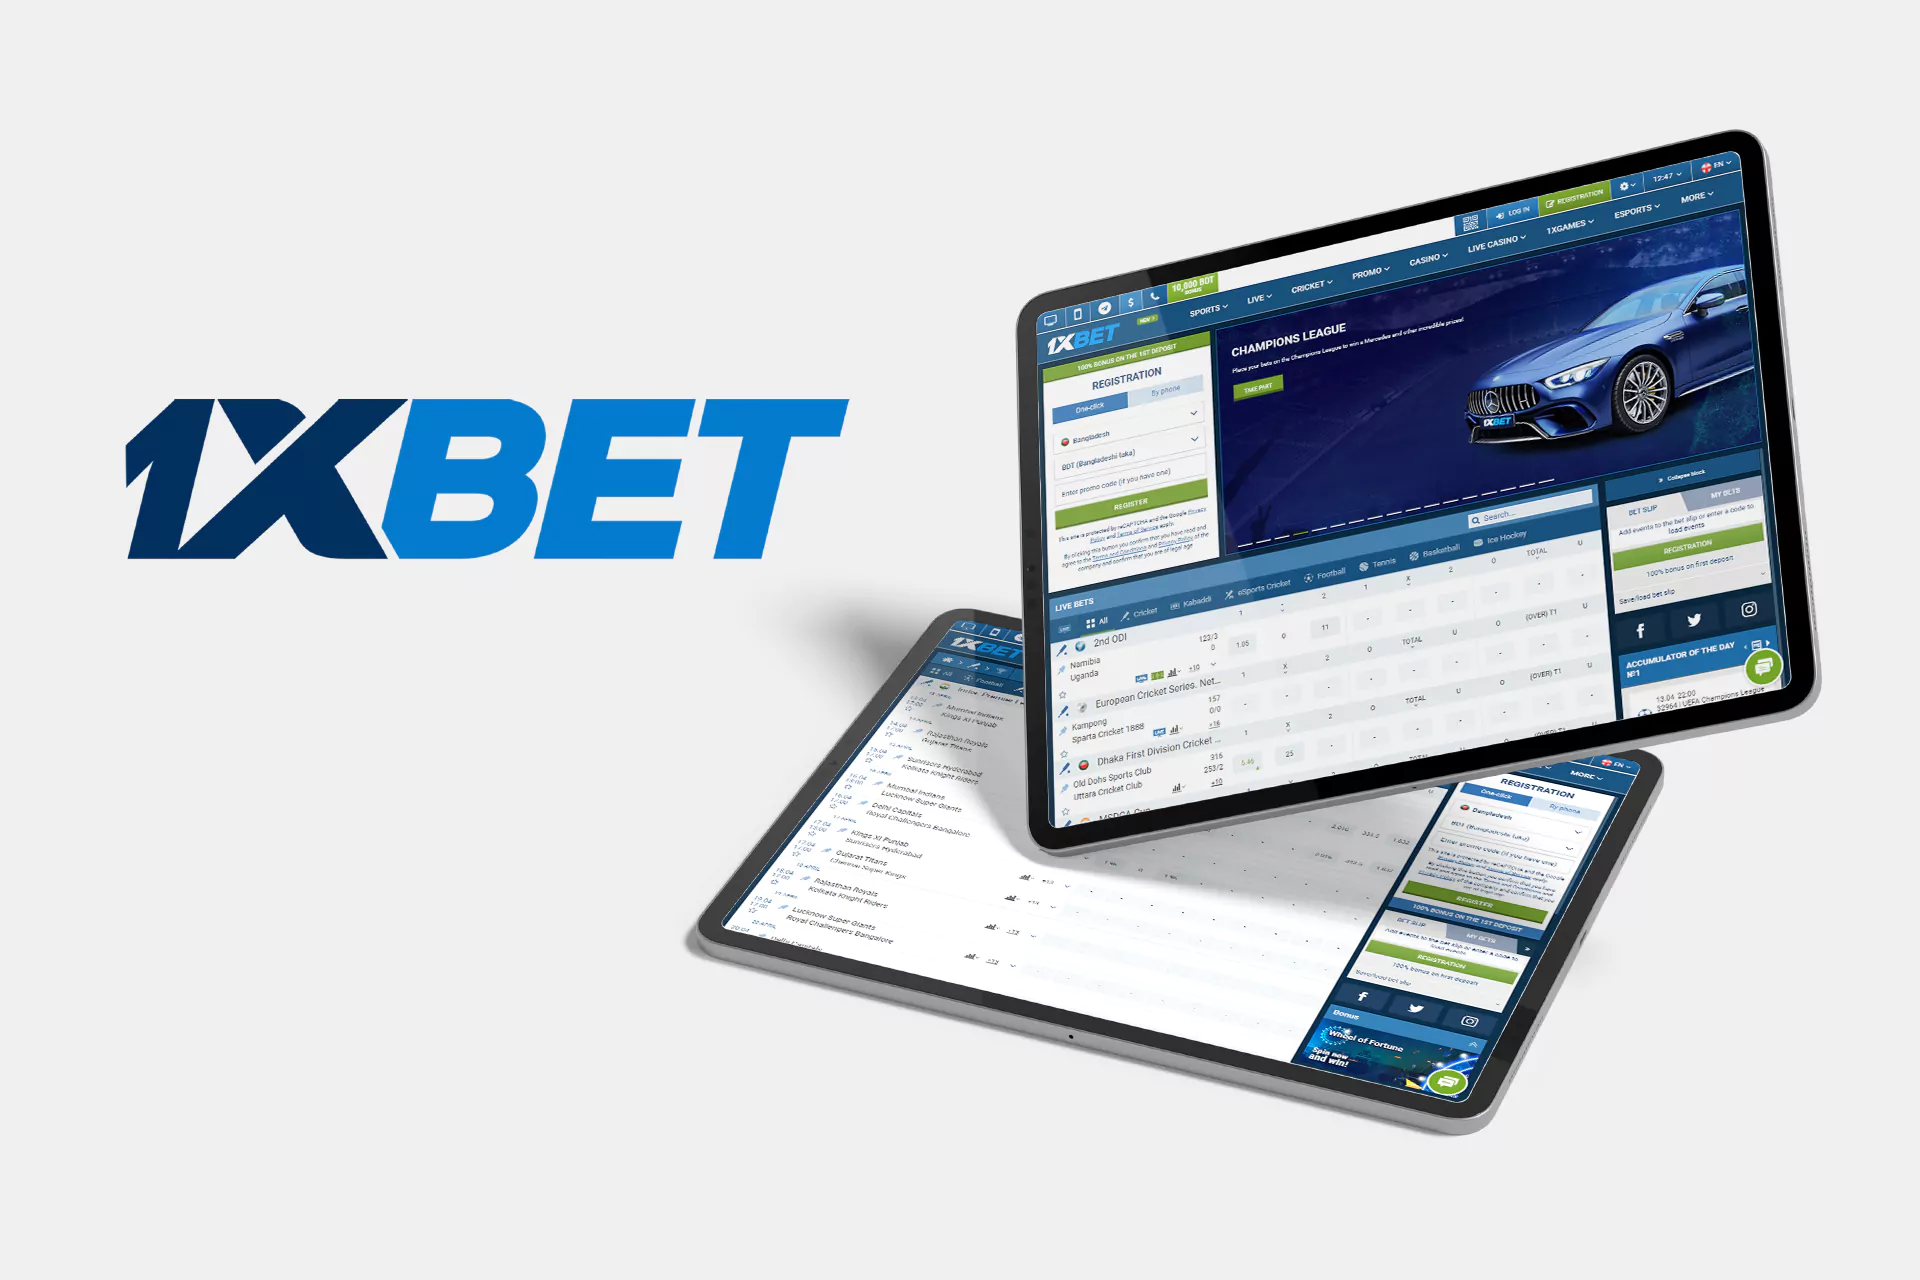 1xBet is one of the leading bookmakers in Bangladesh.